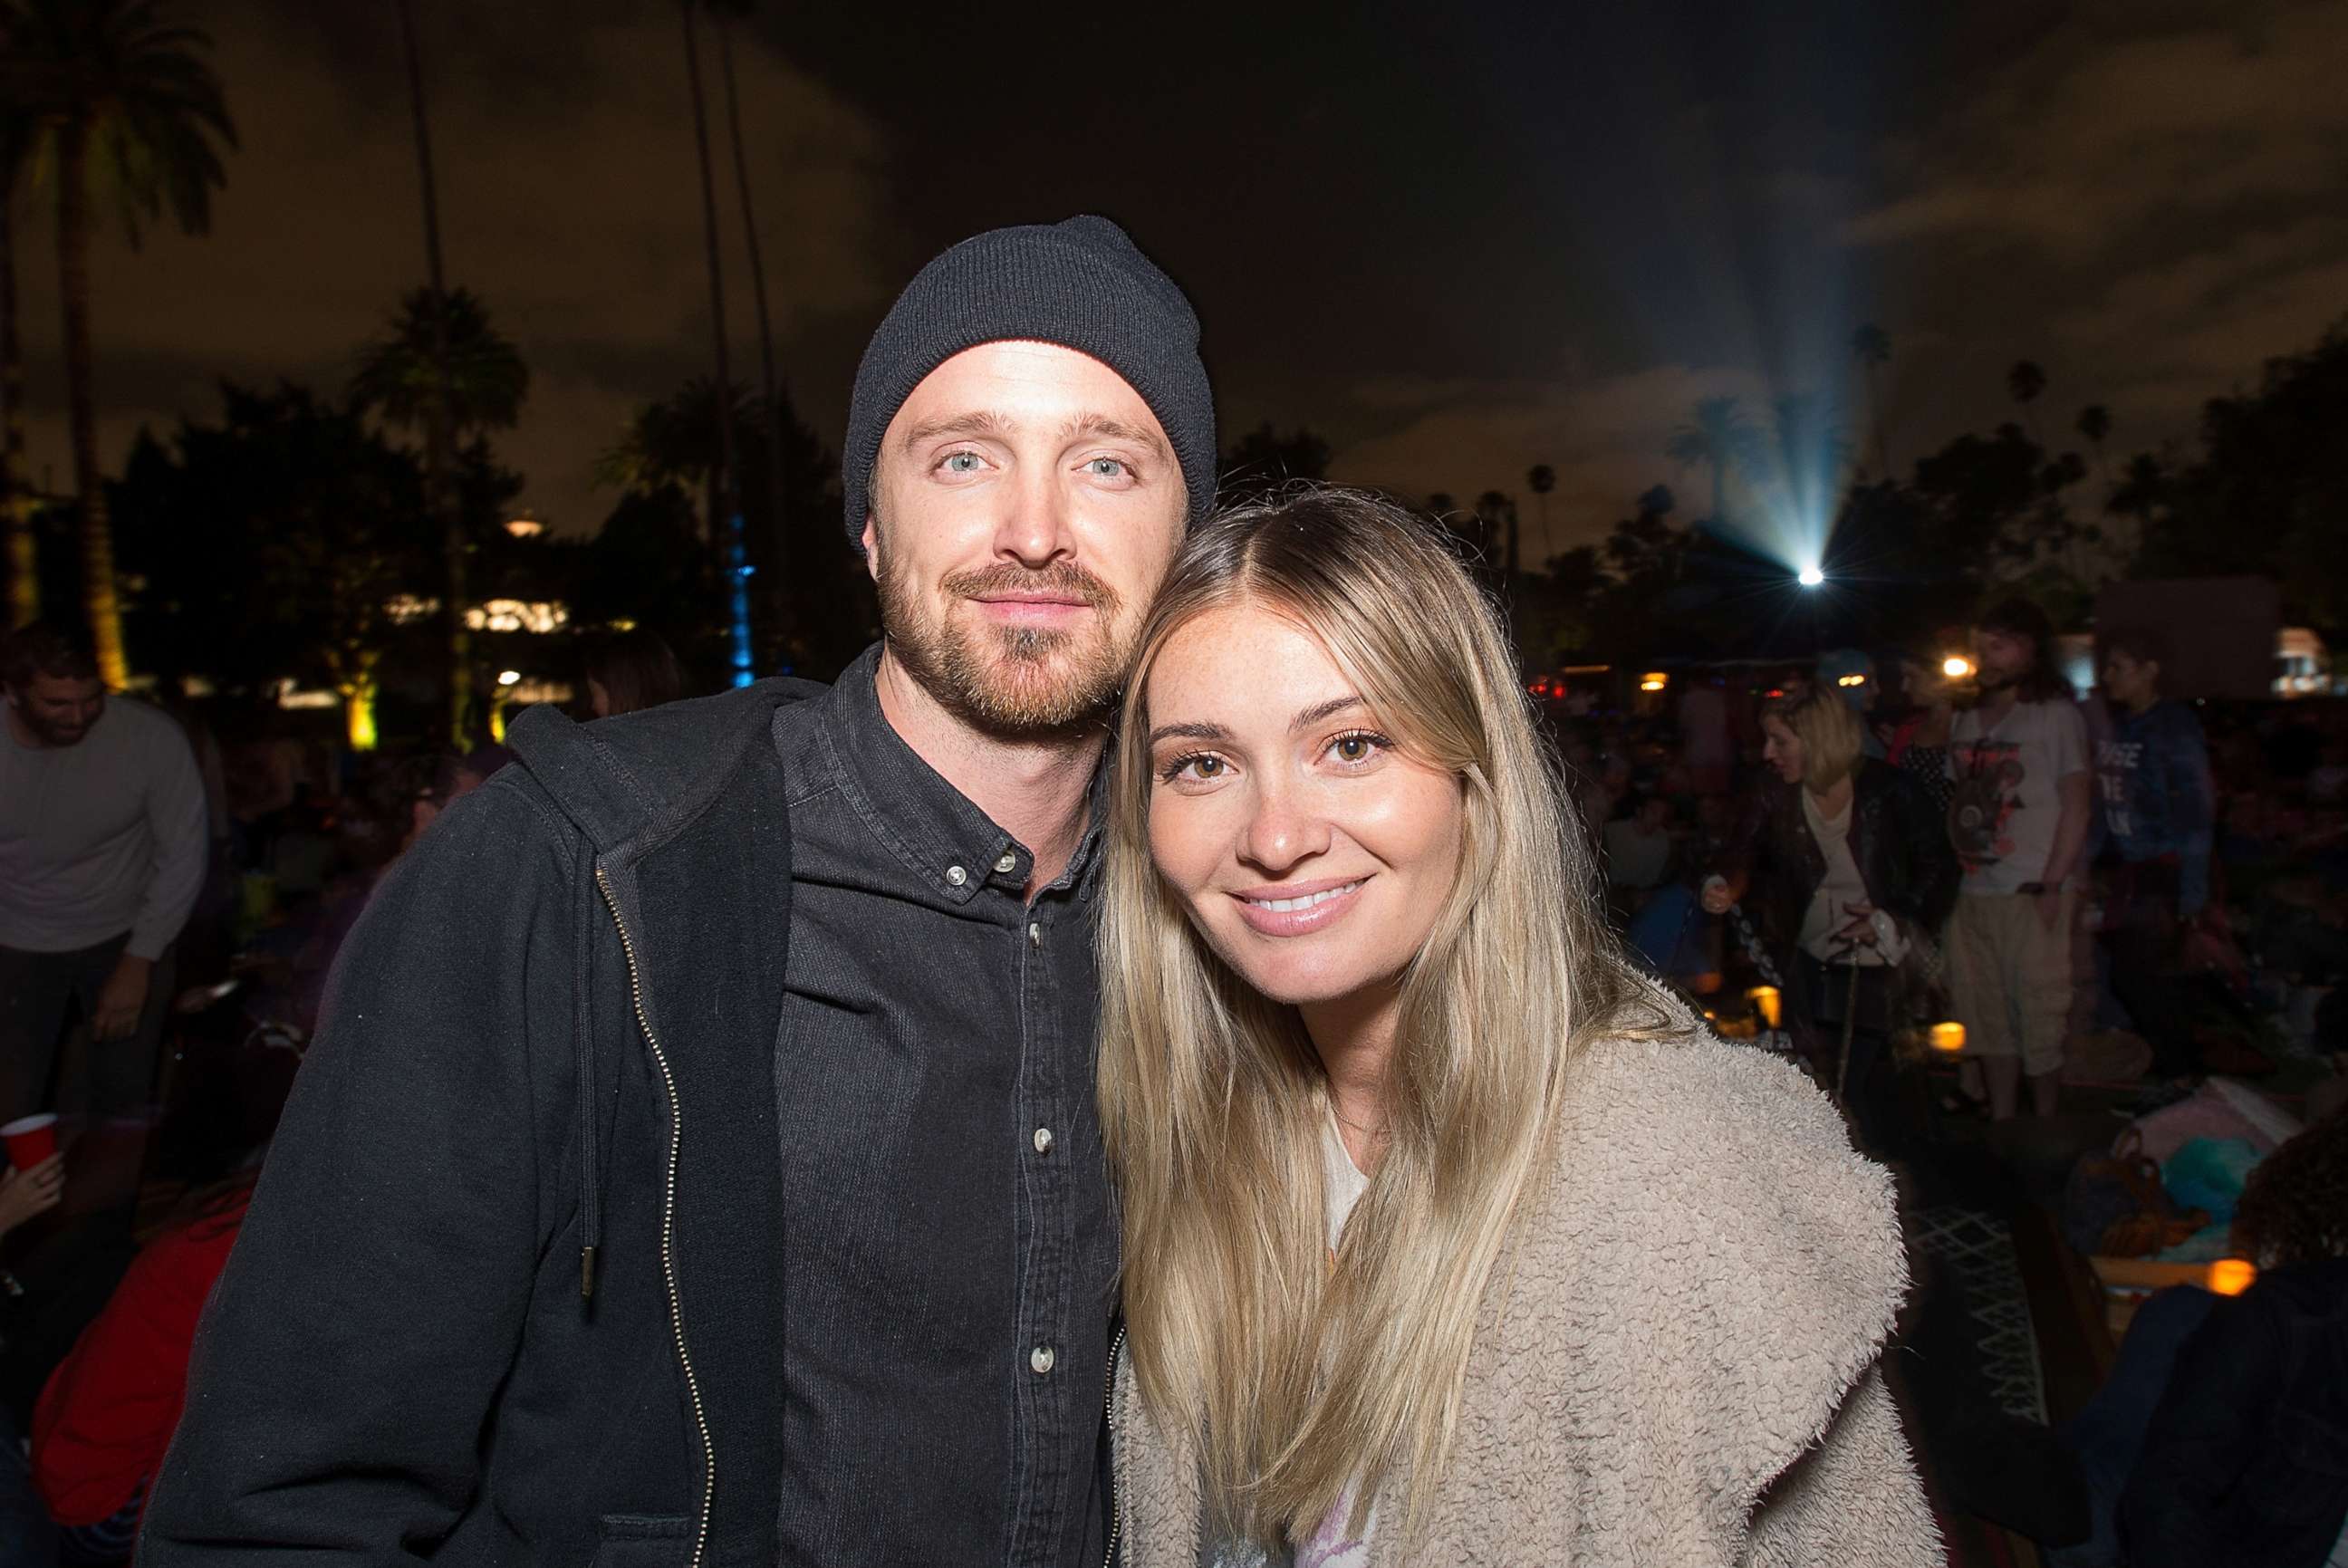 PHOTO: Aaron Paul and Lauren Parsekian attend Cinespia's screening of "Some Like It Hot" held at Hollywood Forever, Aug. 19, 2017, in Hollywood, Calif.